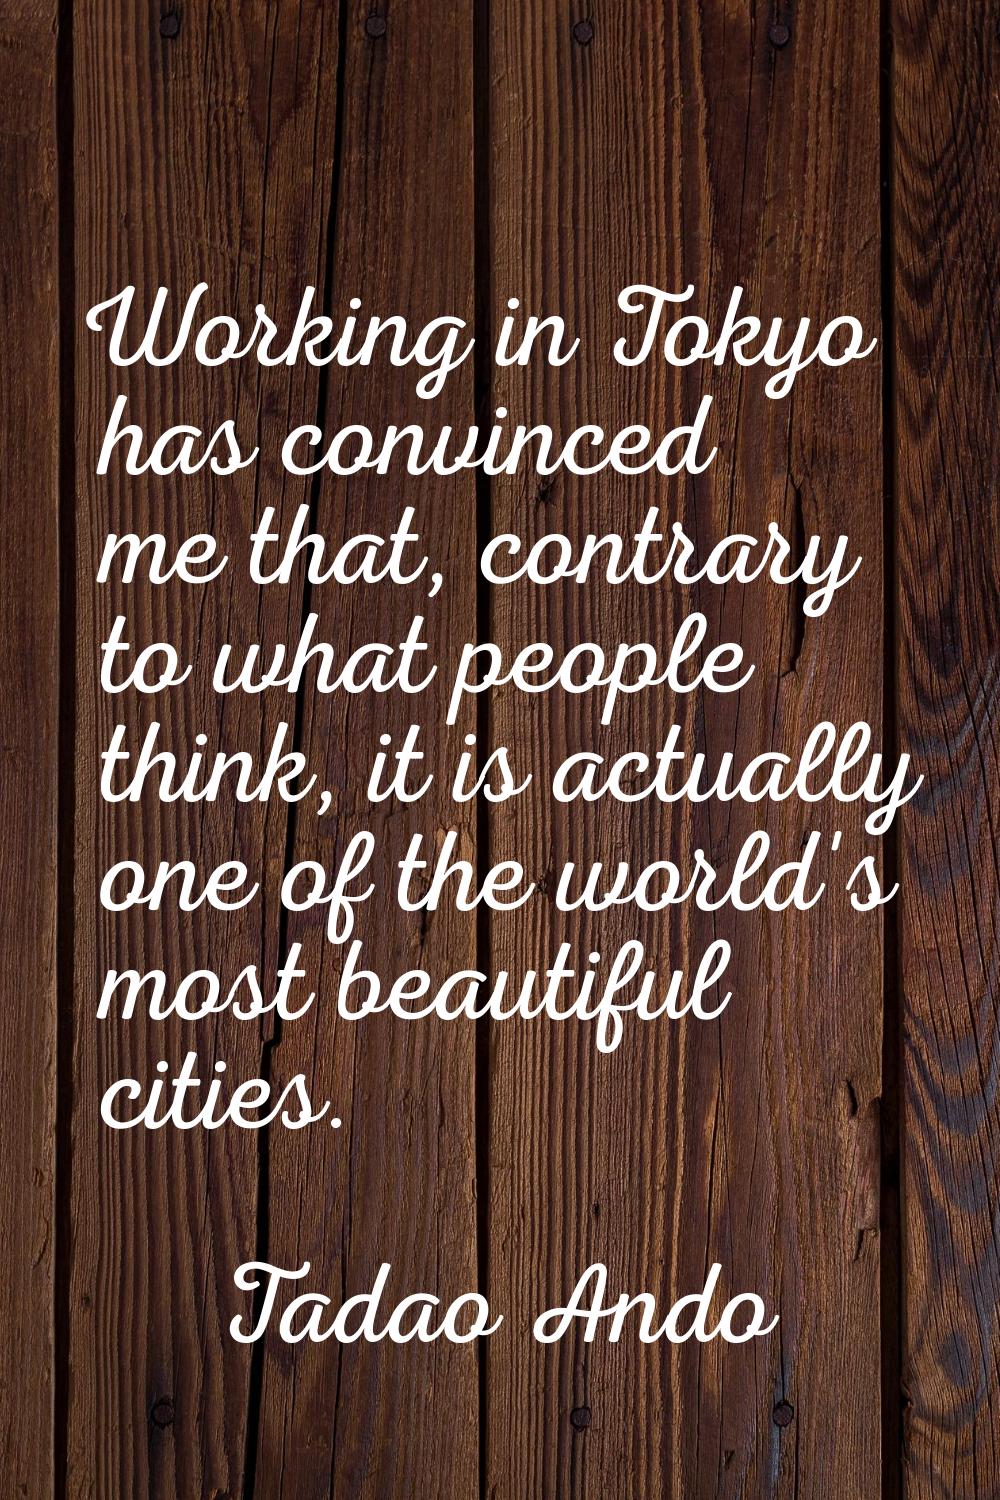 Working in Tokyo has convinced me that, contrary to what people think, it is actually one of the wo